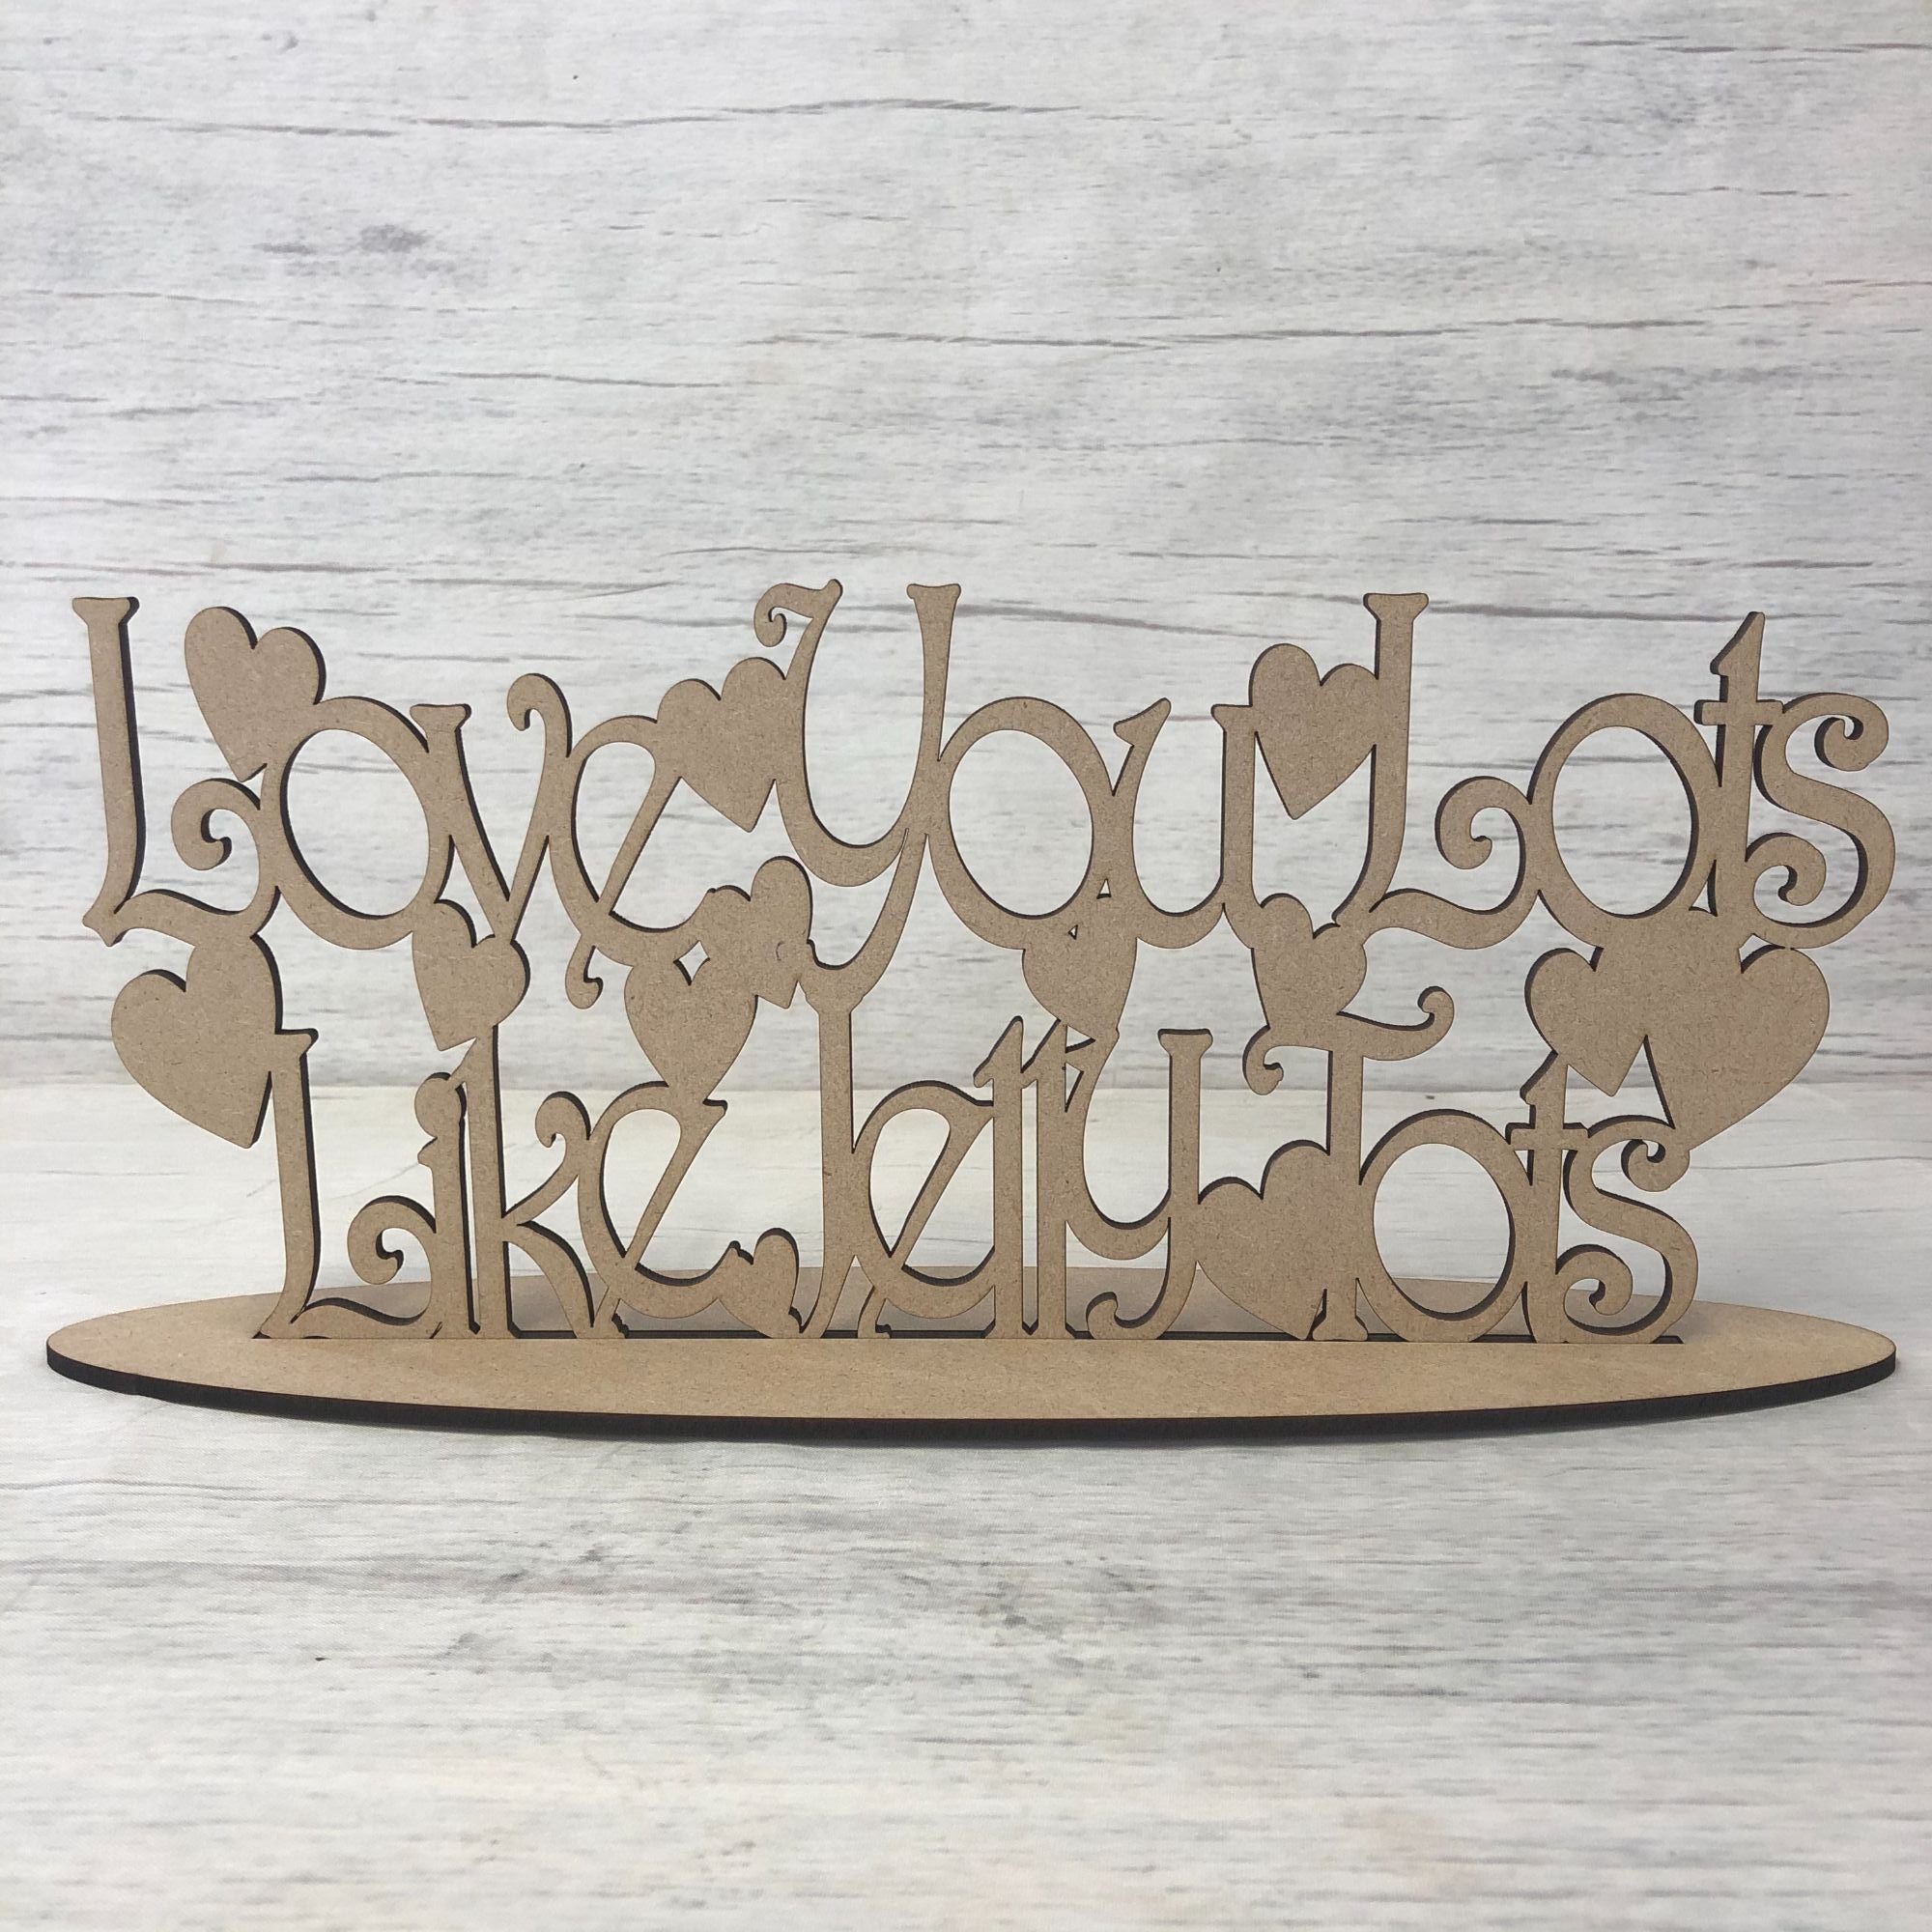 Free standing plaque - 'Love You Lots Like Jelly Tots'